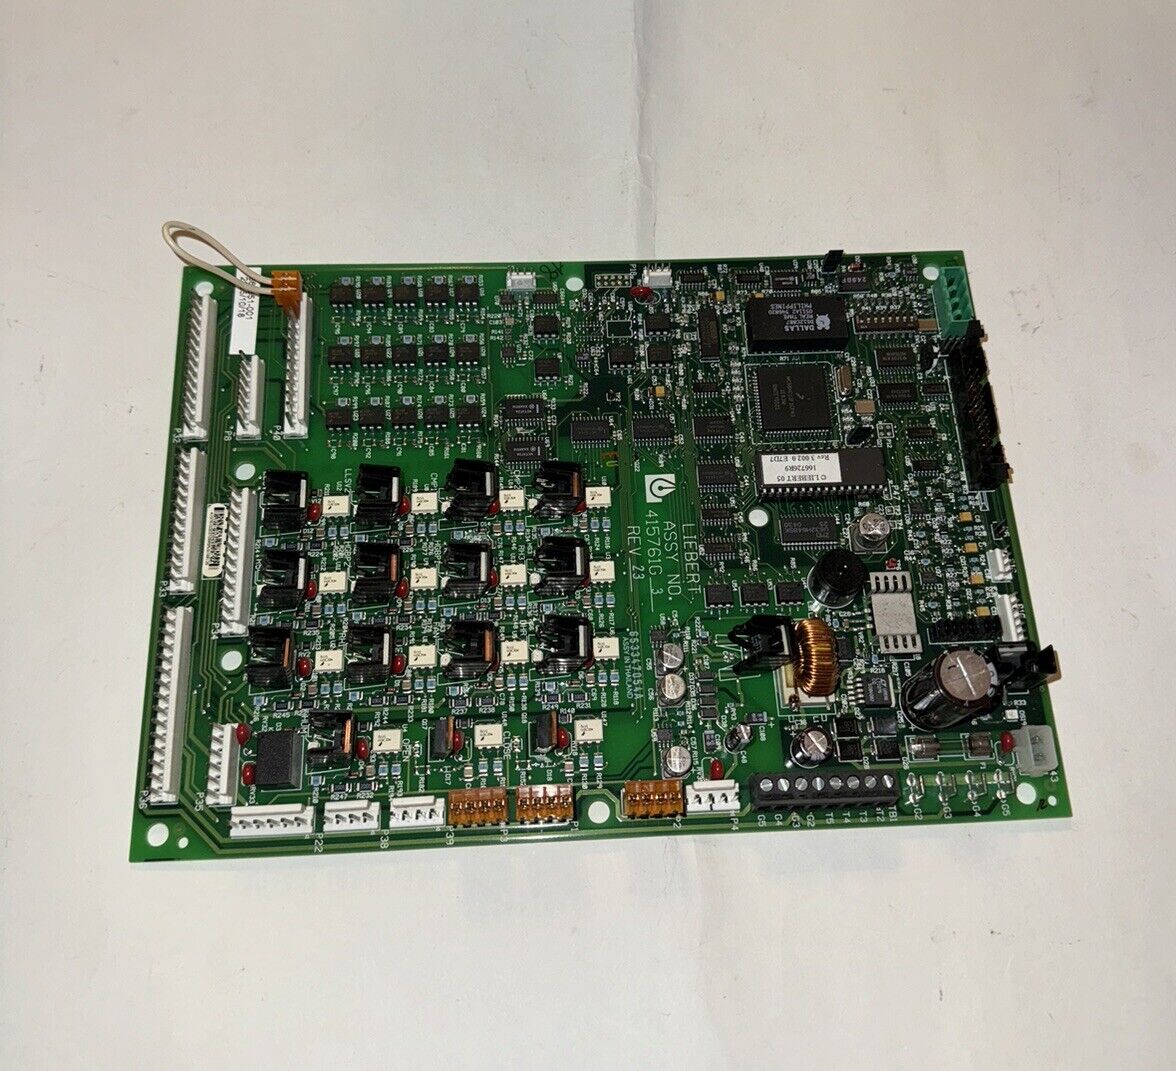 LIEBERT 415761G-3 REV 23 CONTROL BOARD ASSEMBLY Tested